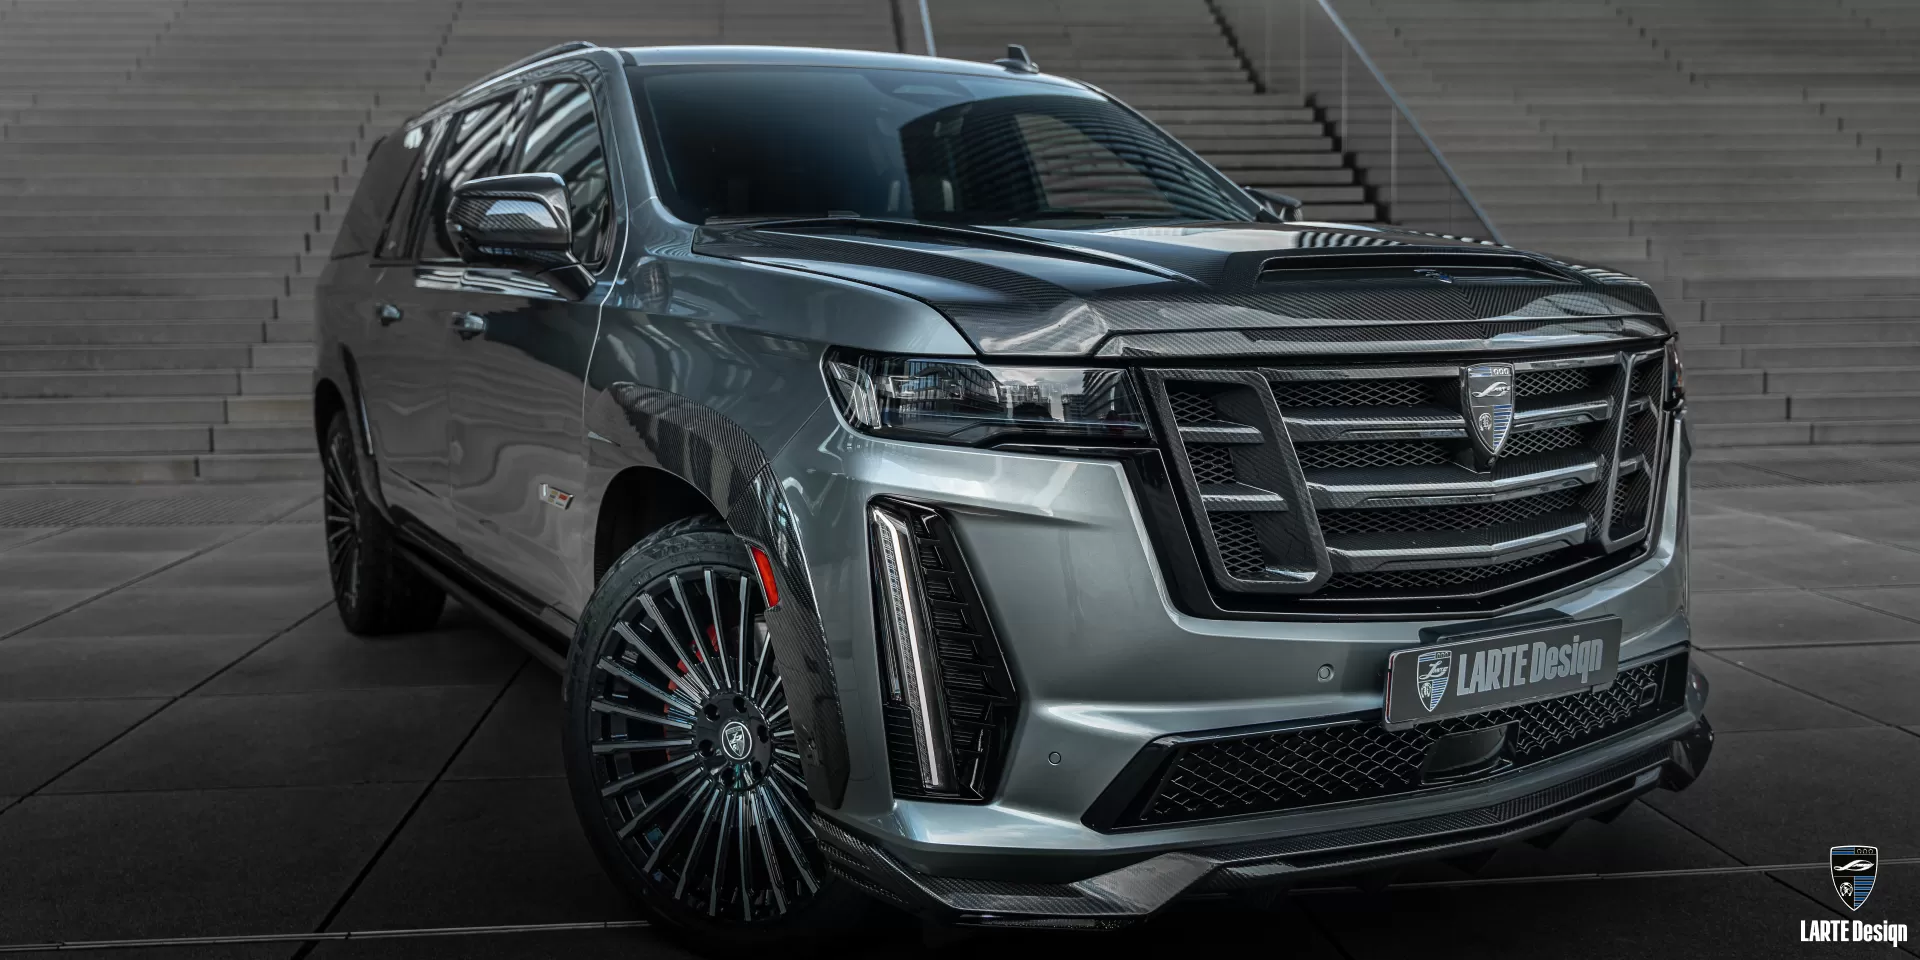 Cadillac Escalade V custom front bumper lip and forged rims from LARTE Design 